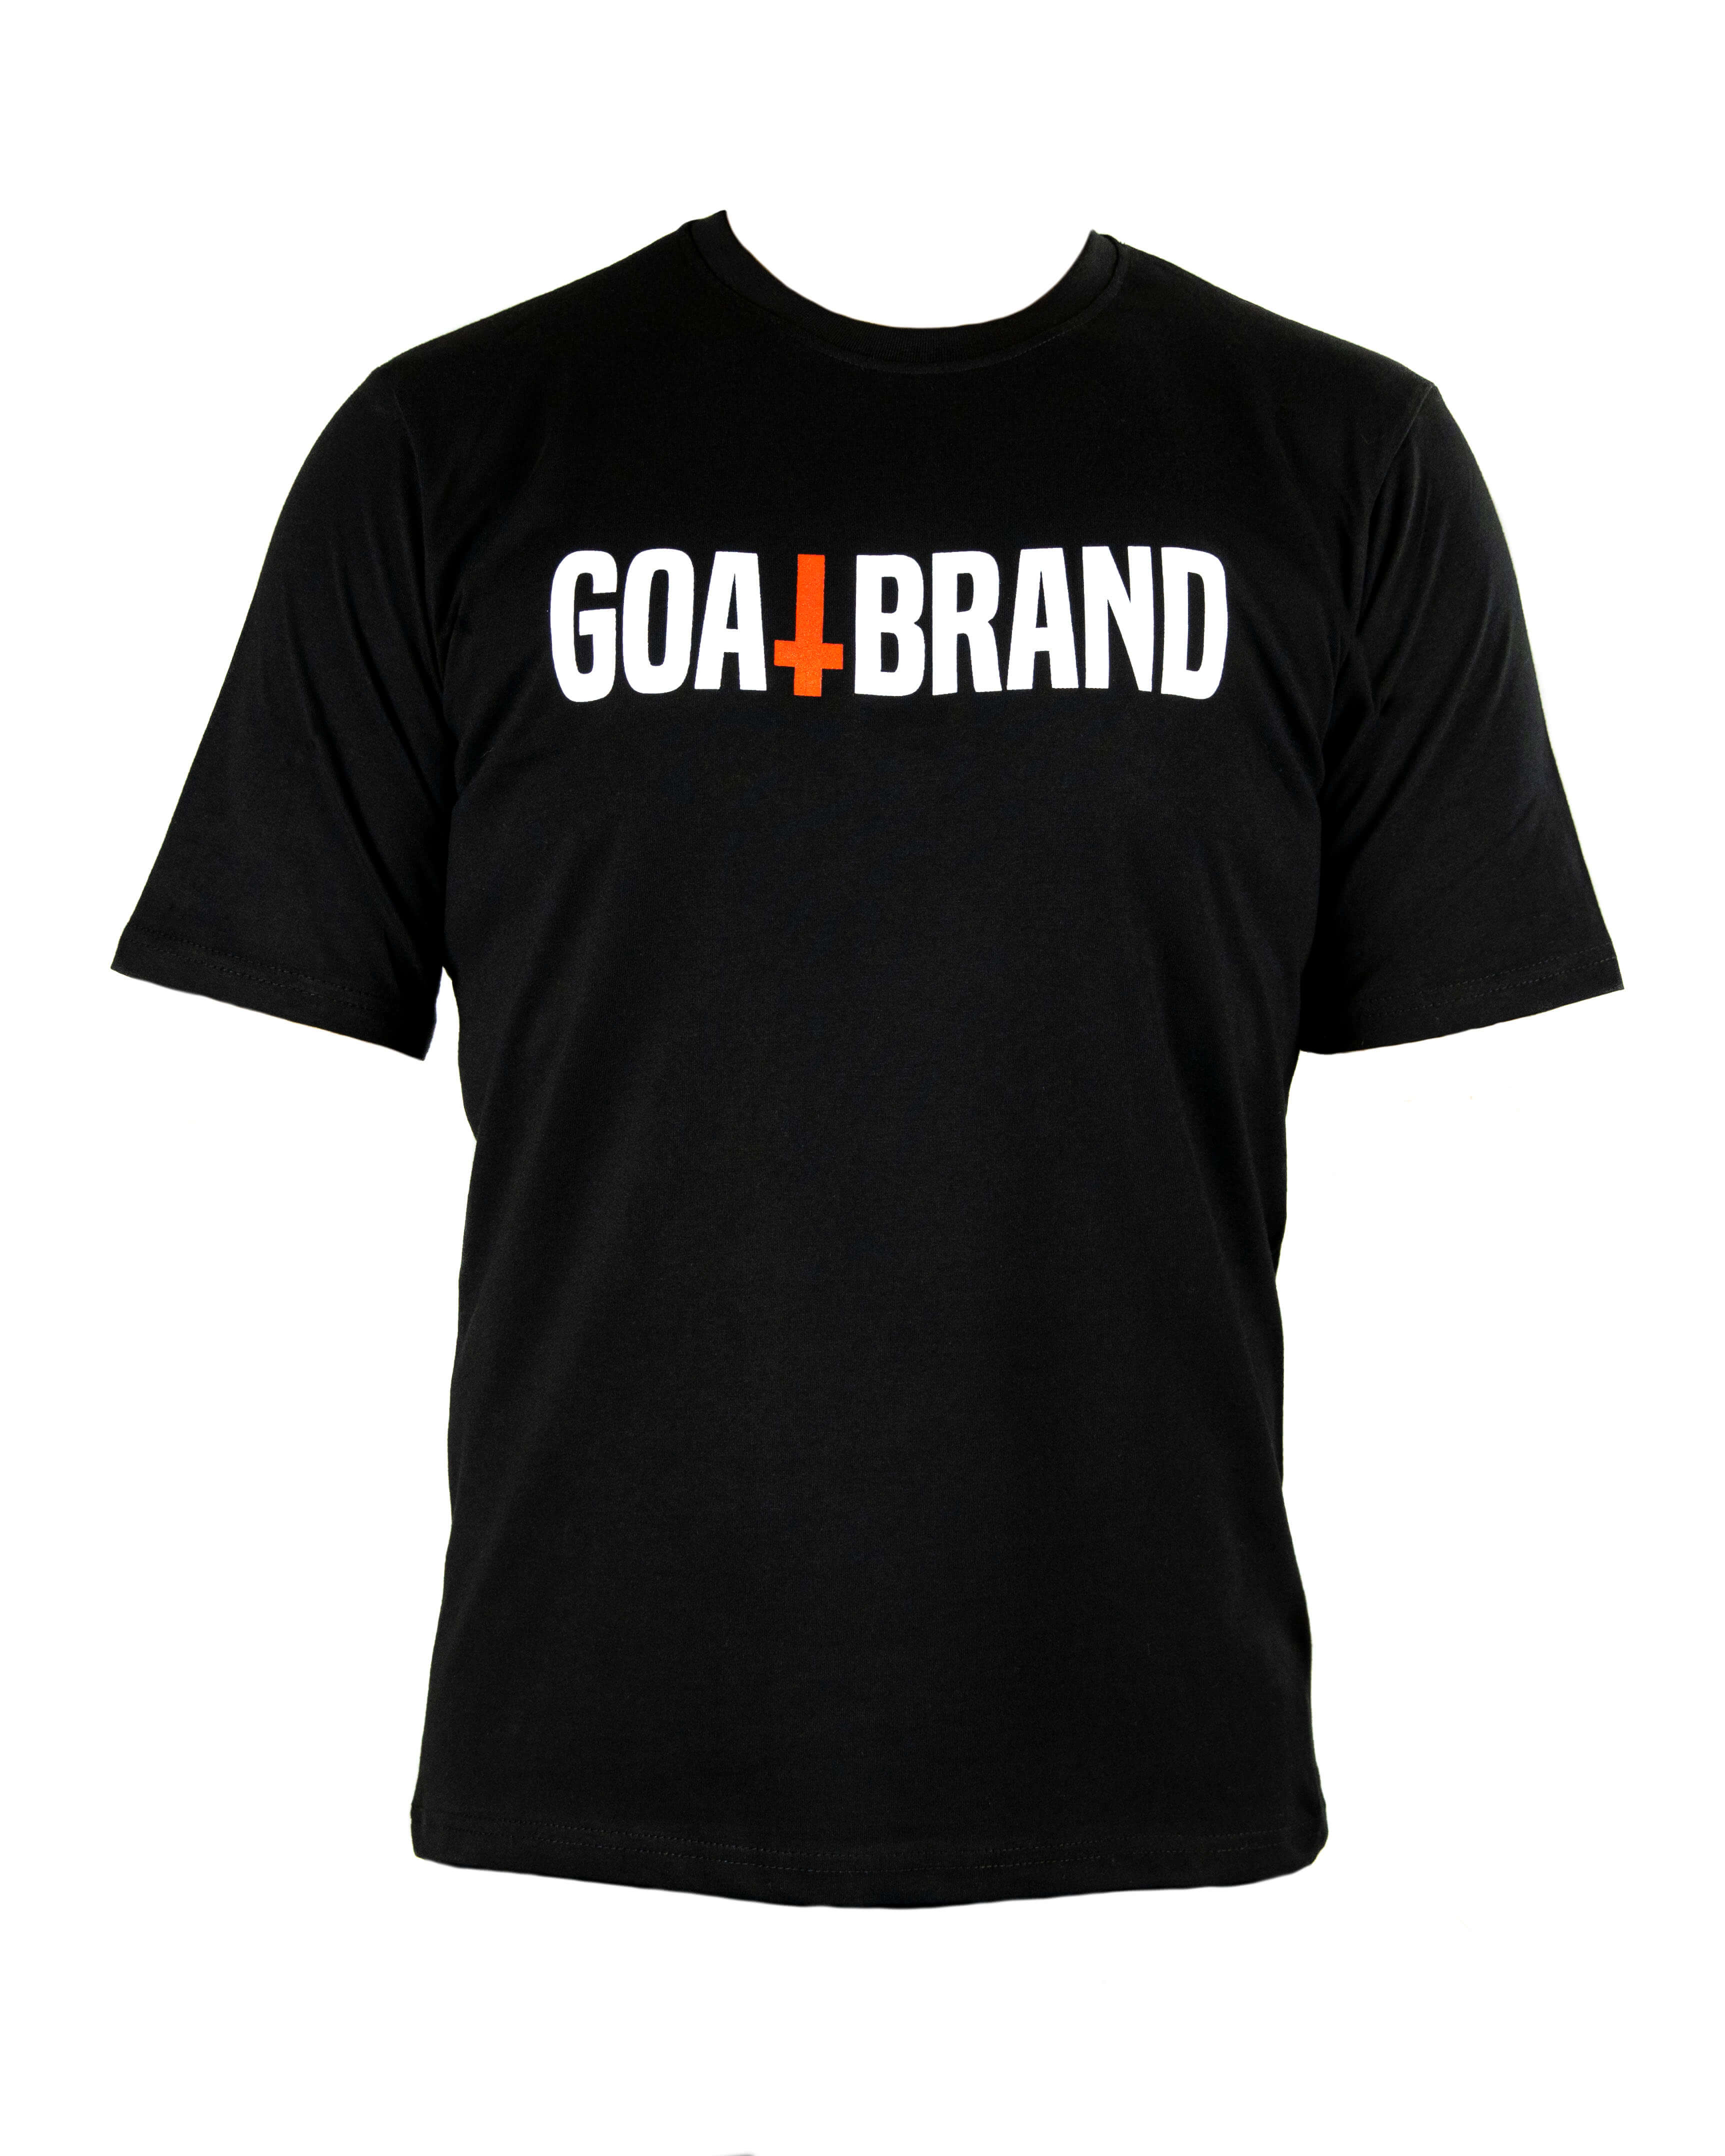 The GOATBRAND Casual Tee